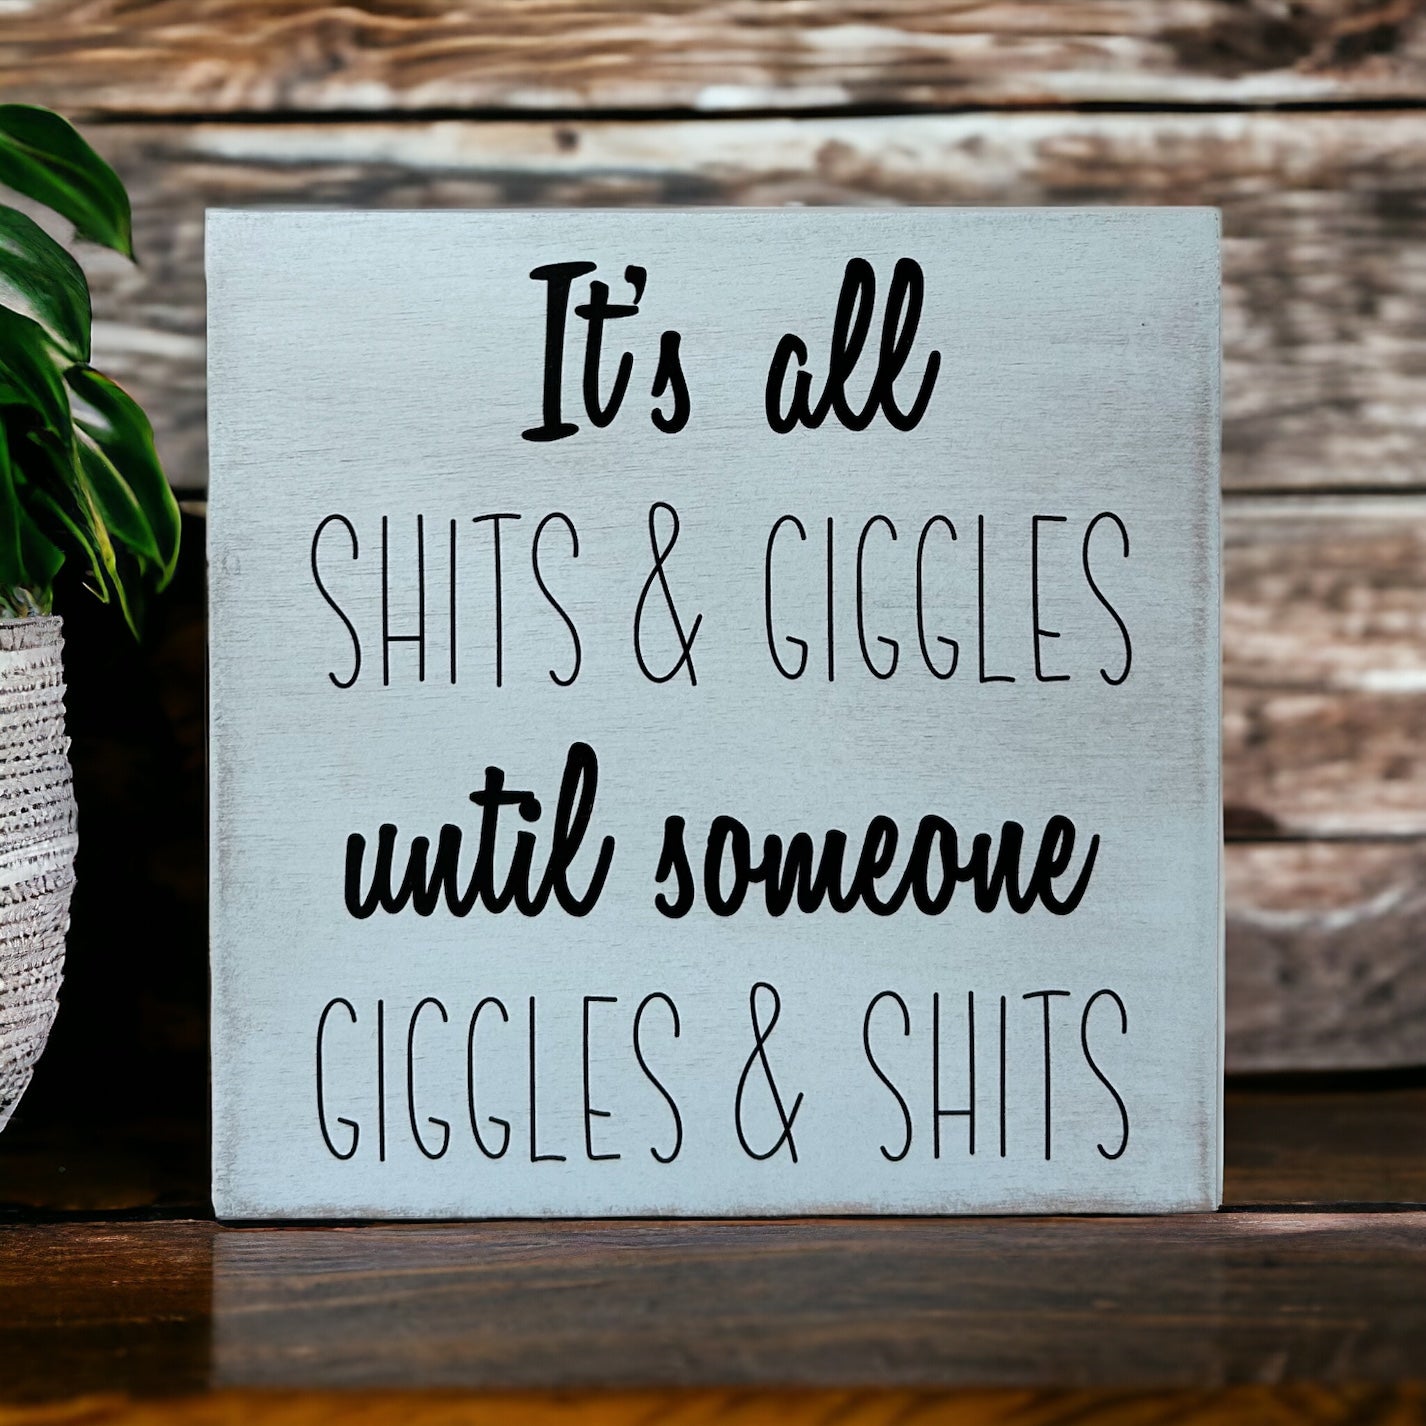 It’s All Shits & Giggles - Funny Rustic Wood Sign